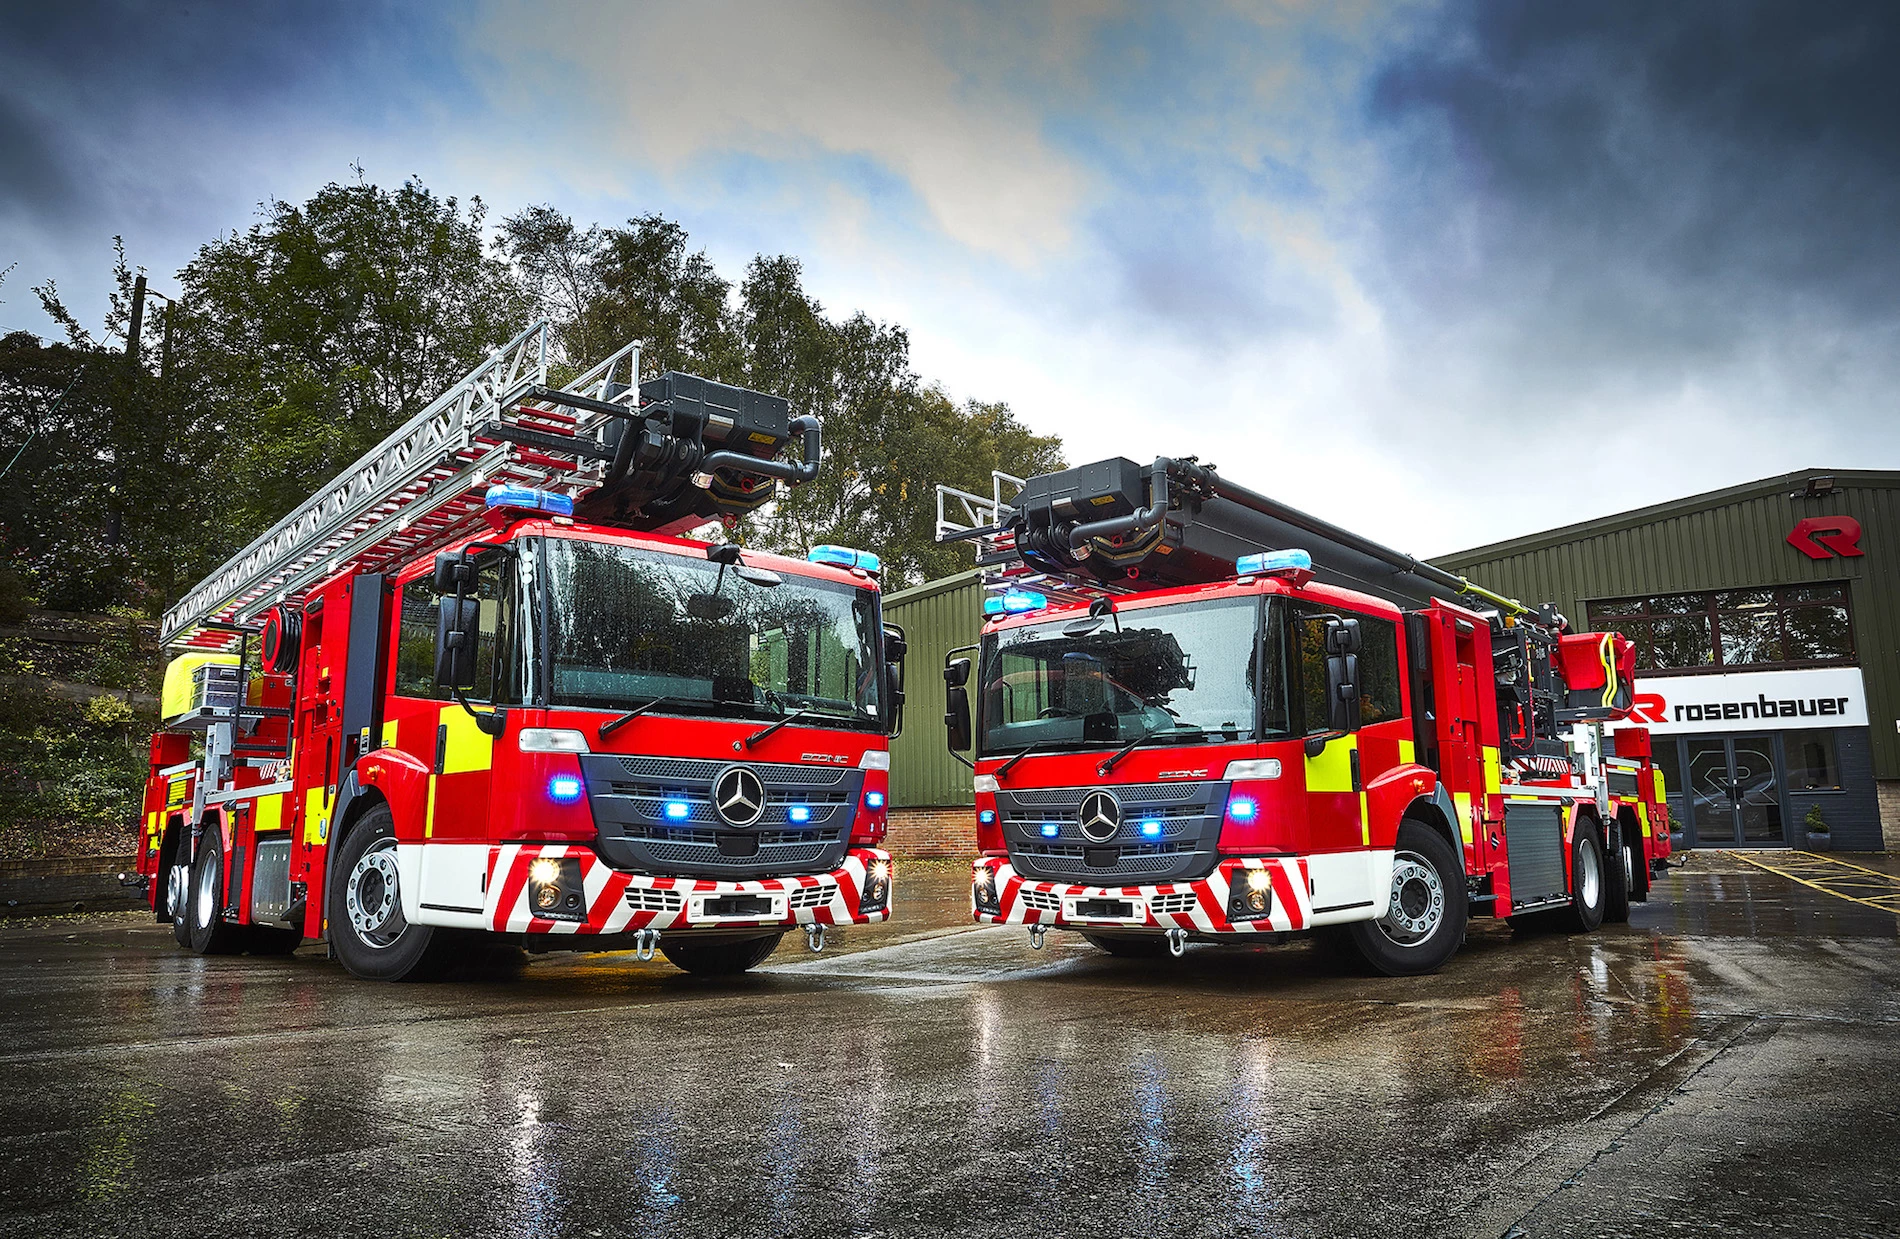 Rosenbauer UK is a supplier of frontline fire vehicles. 